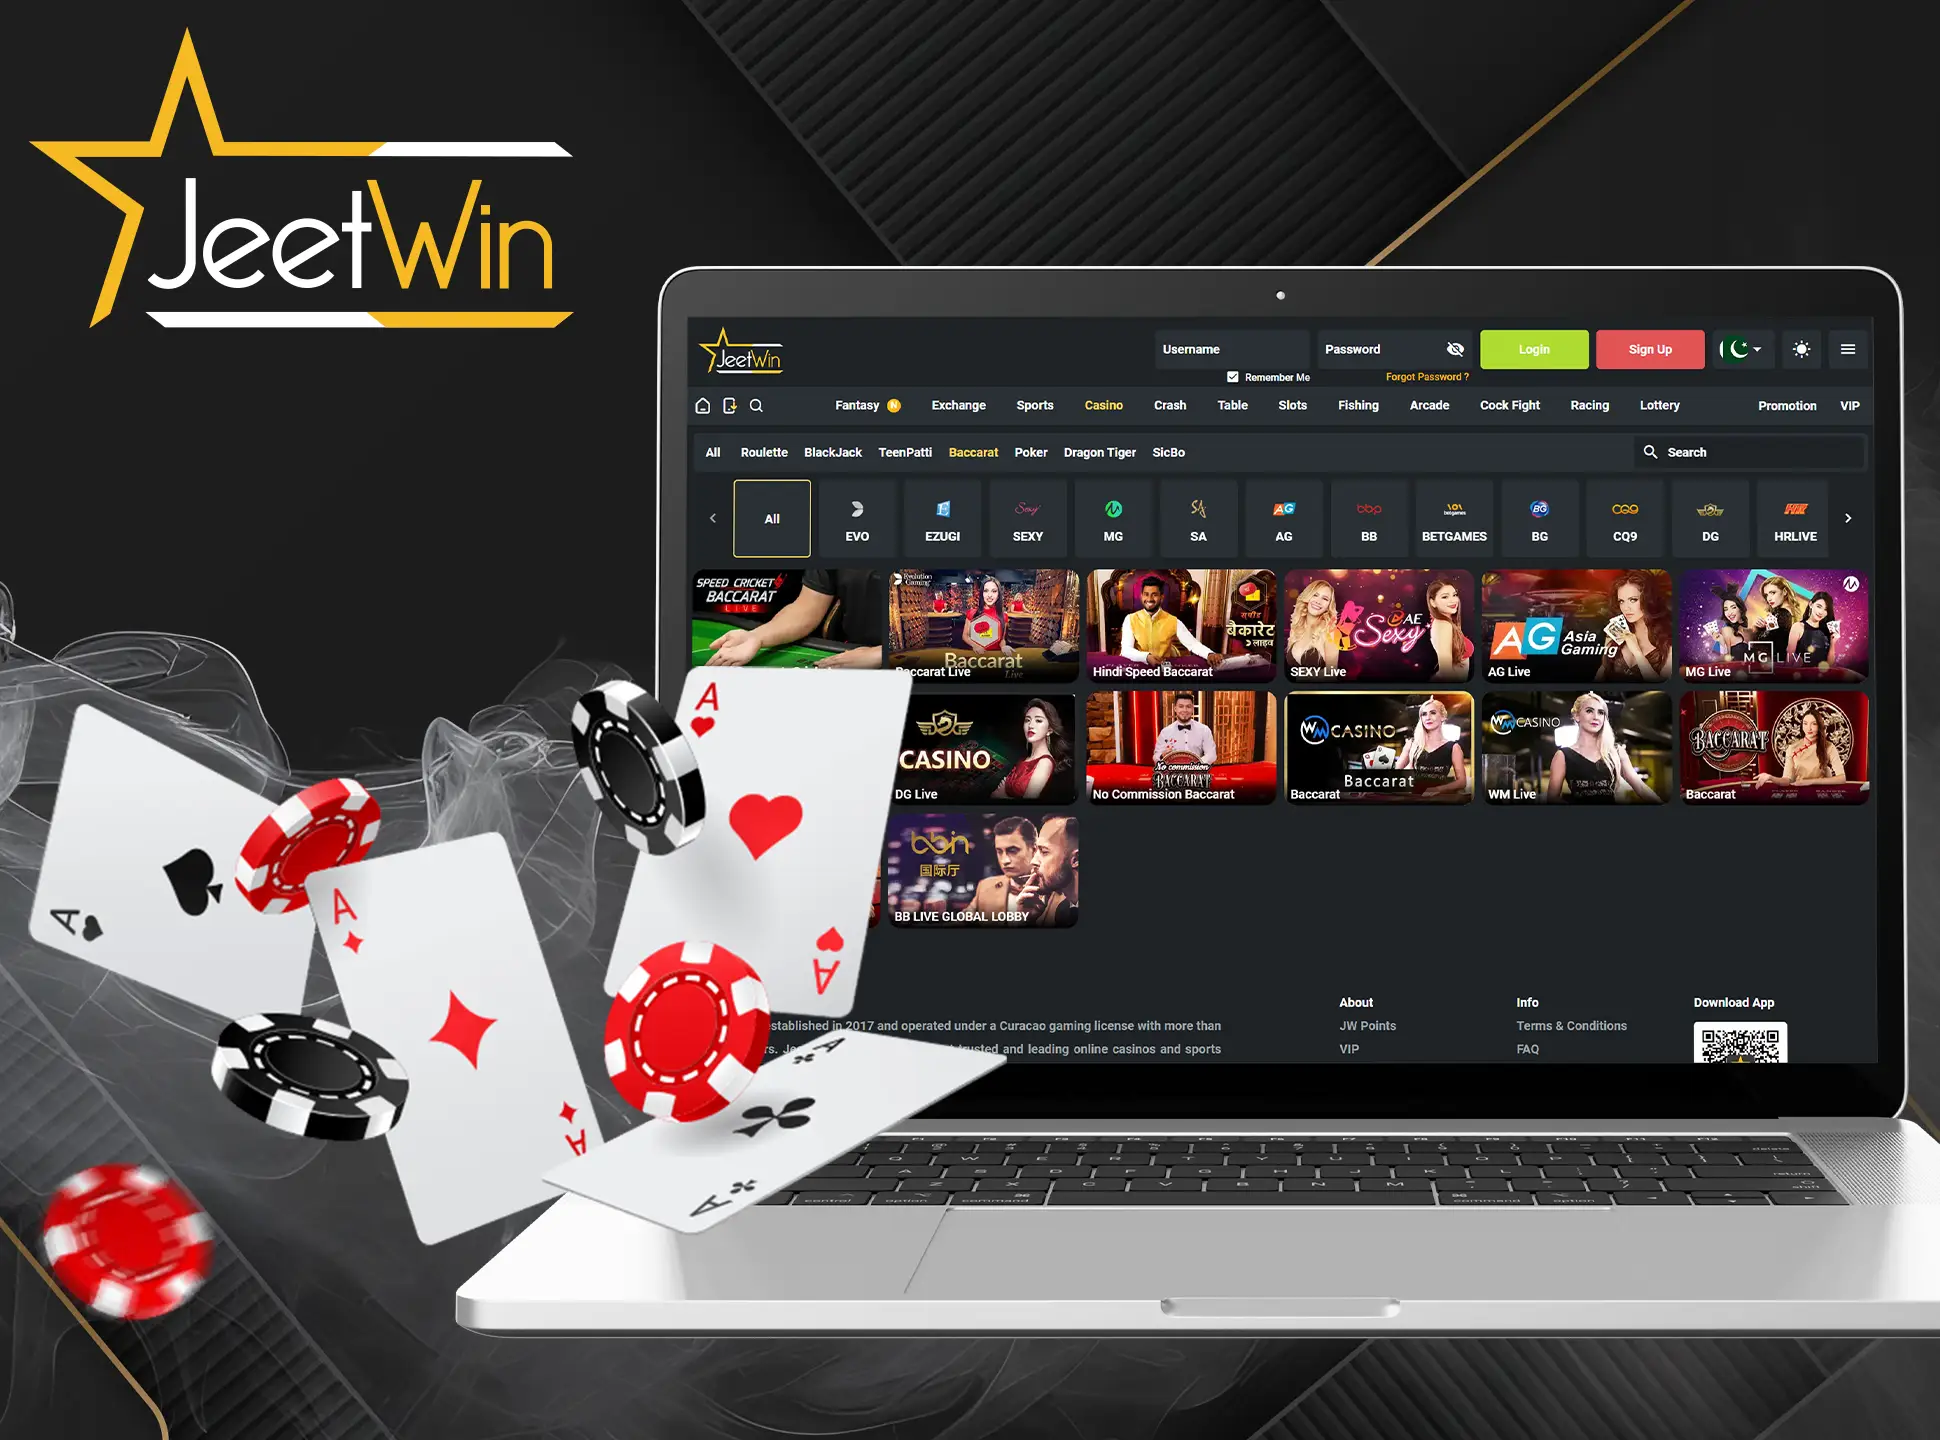 Play the card game Baccarat on the official JeetWin website.